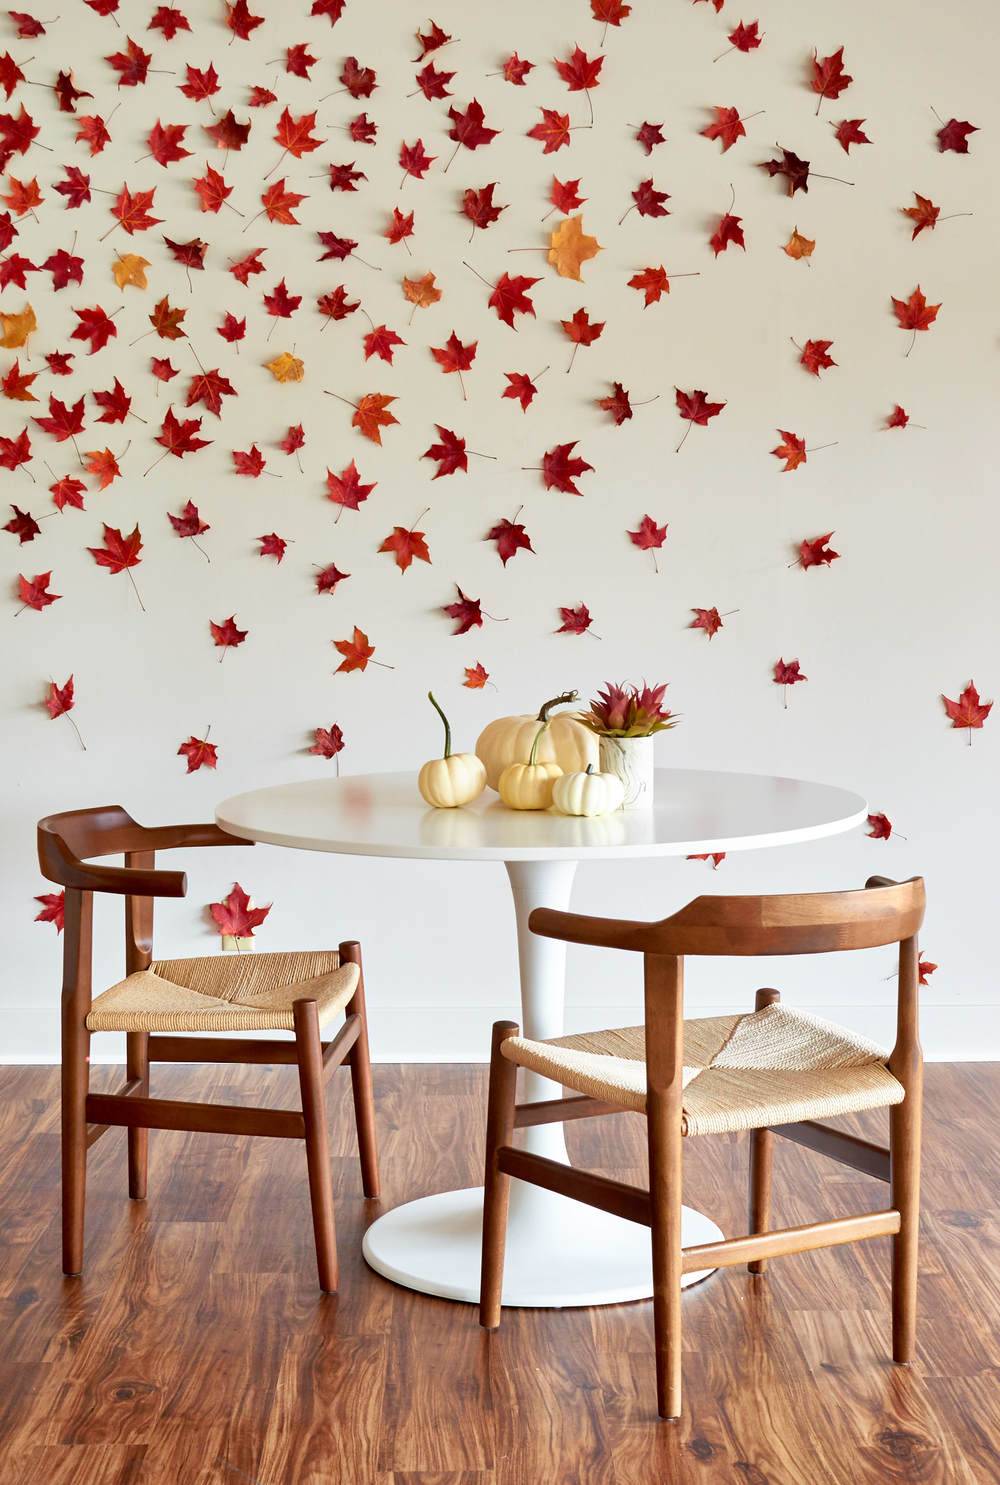 Table and chairs below a wall full of scattered leaves.